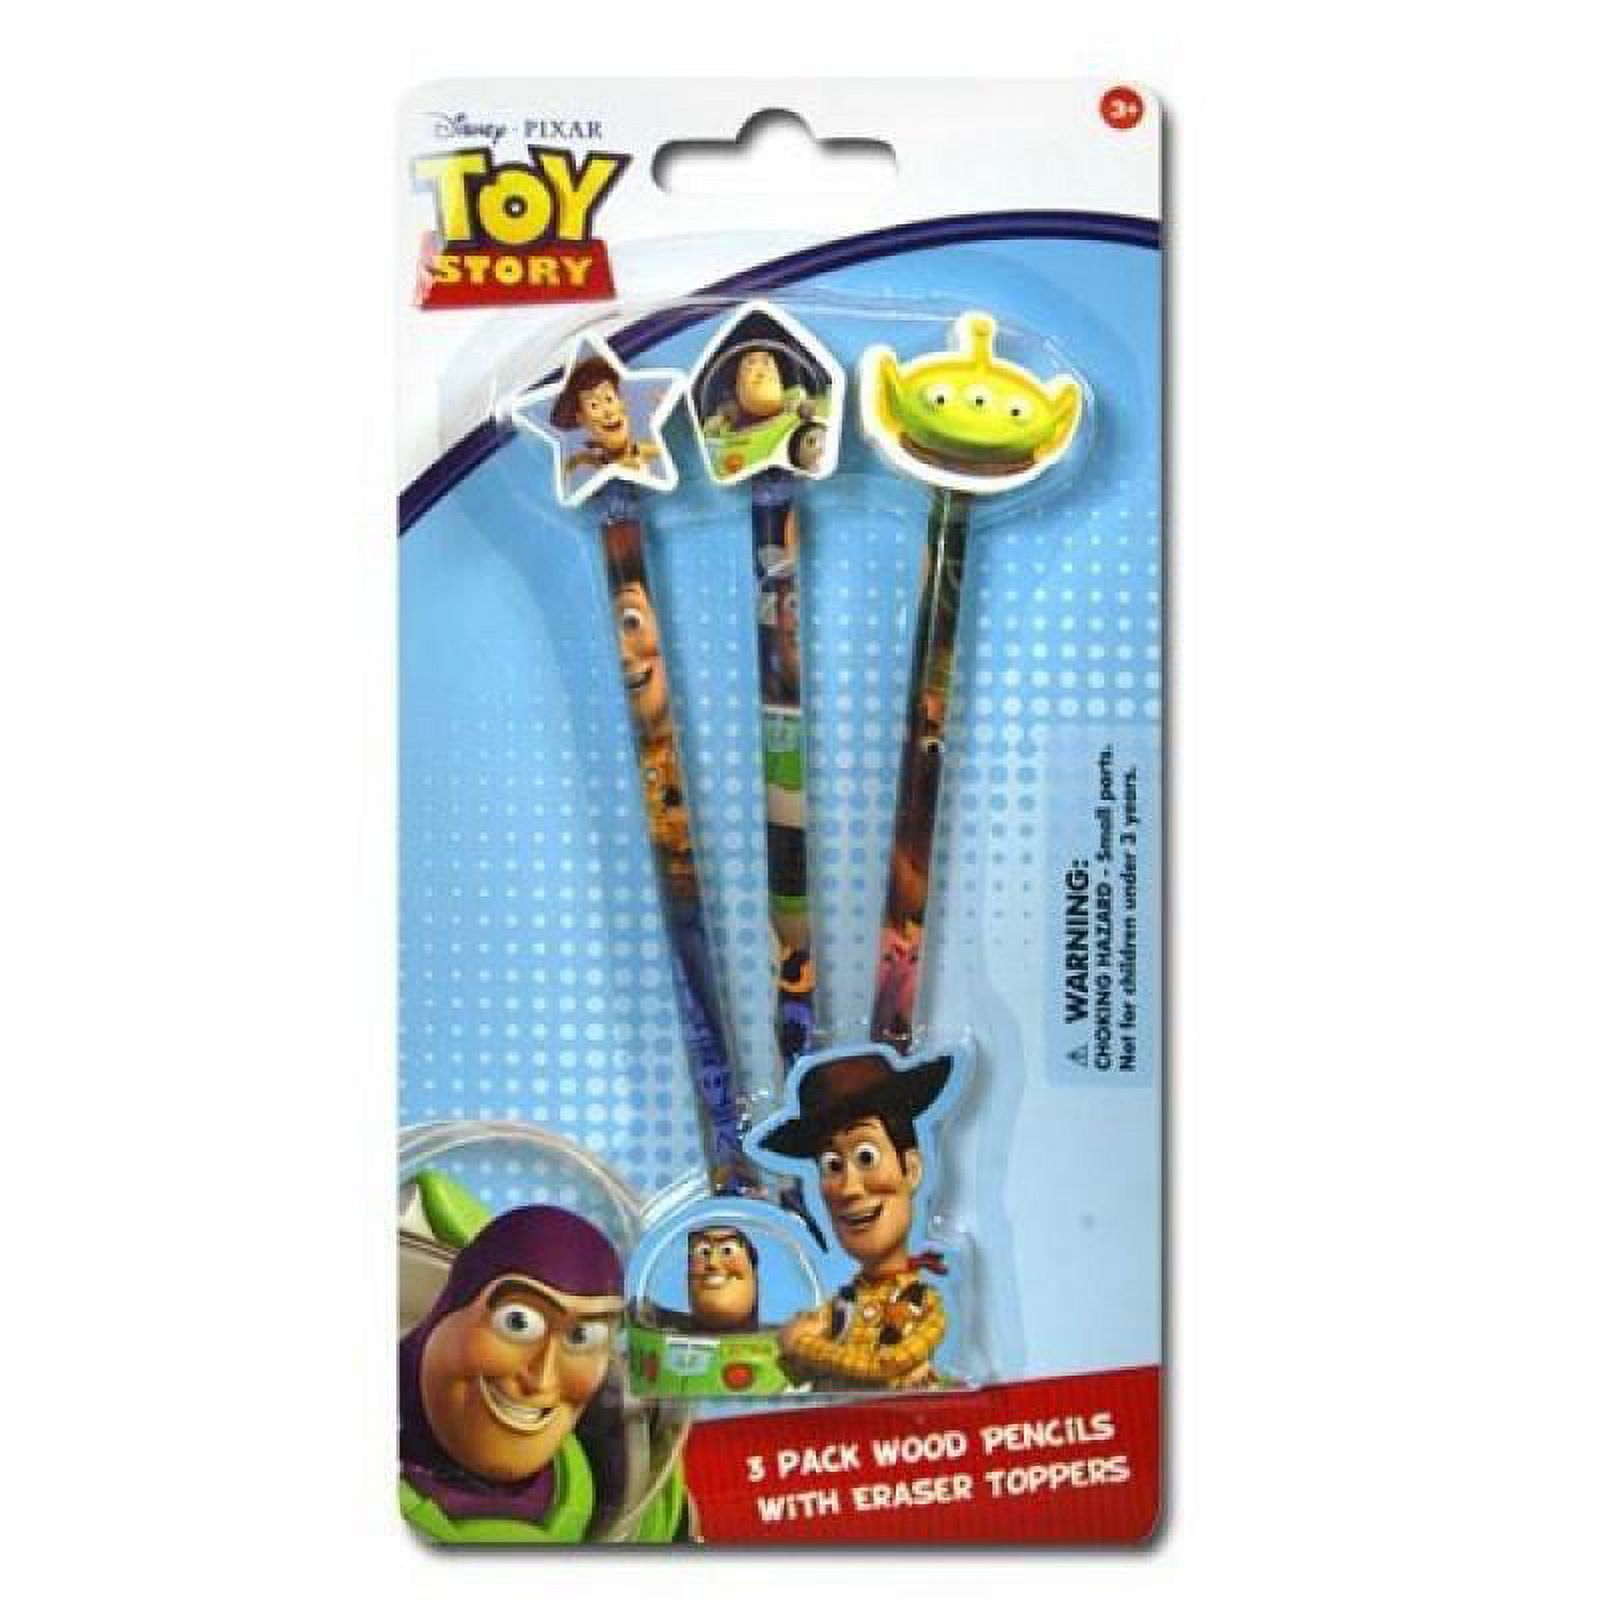 Disney Toy Story Pencils - Toy Story Pencil Set - Toys Story Pencil Set and Eraser Toppers - image 1 of 3